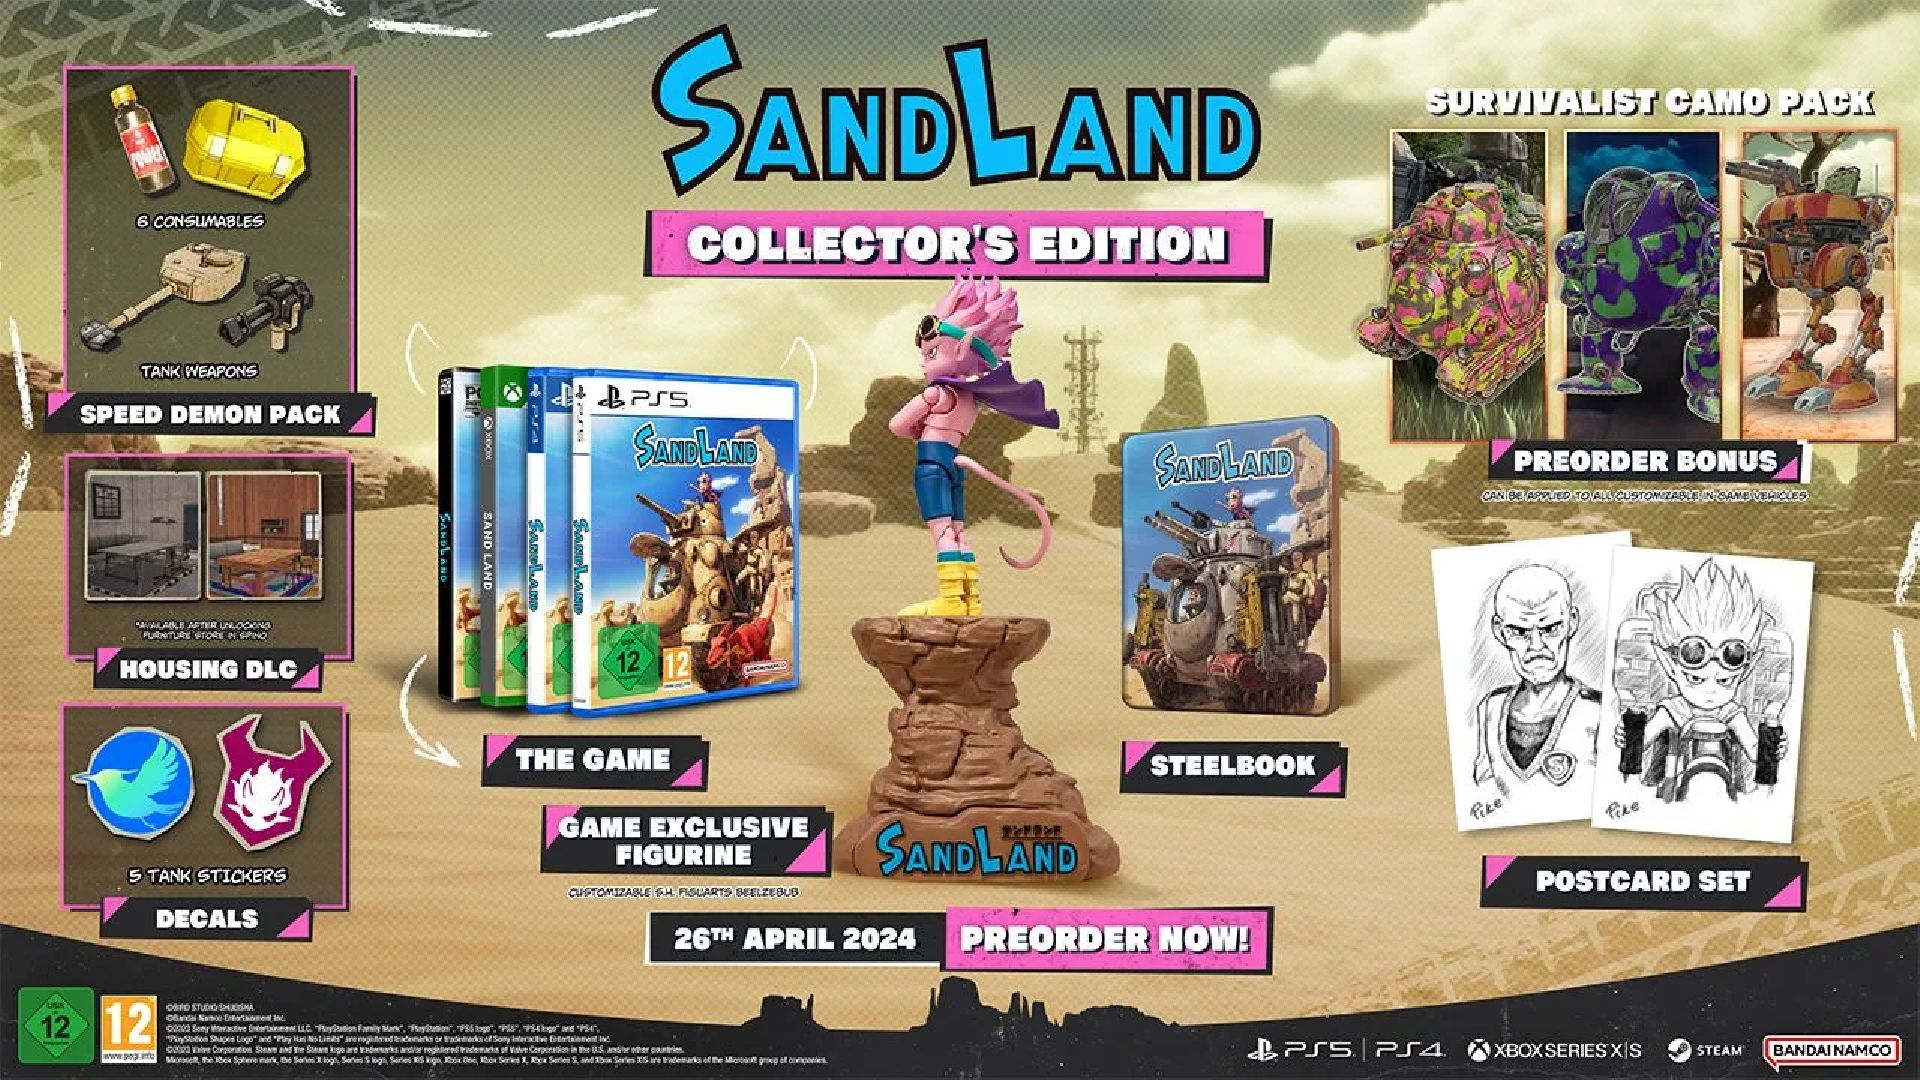 The Sand Land Standard Edition